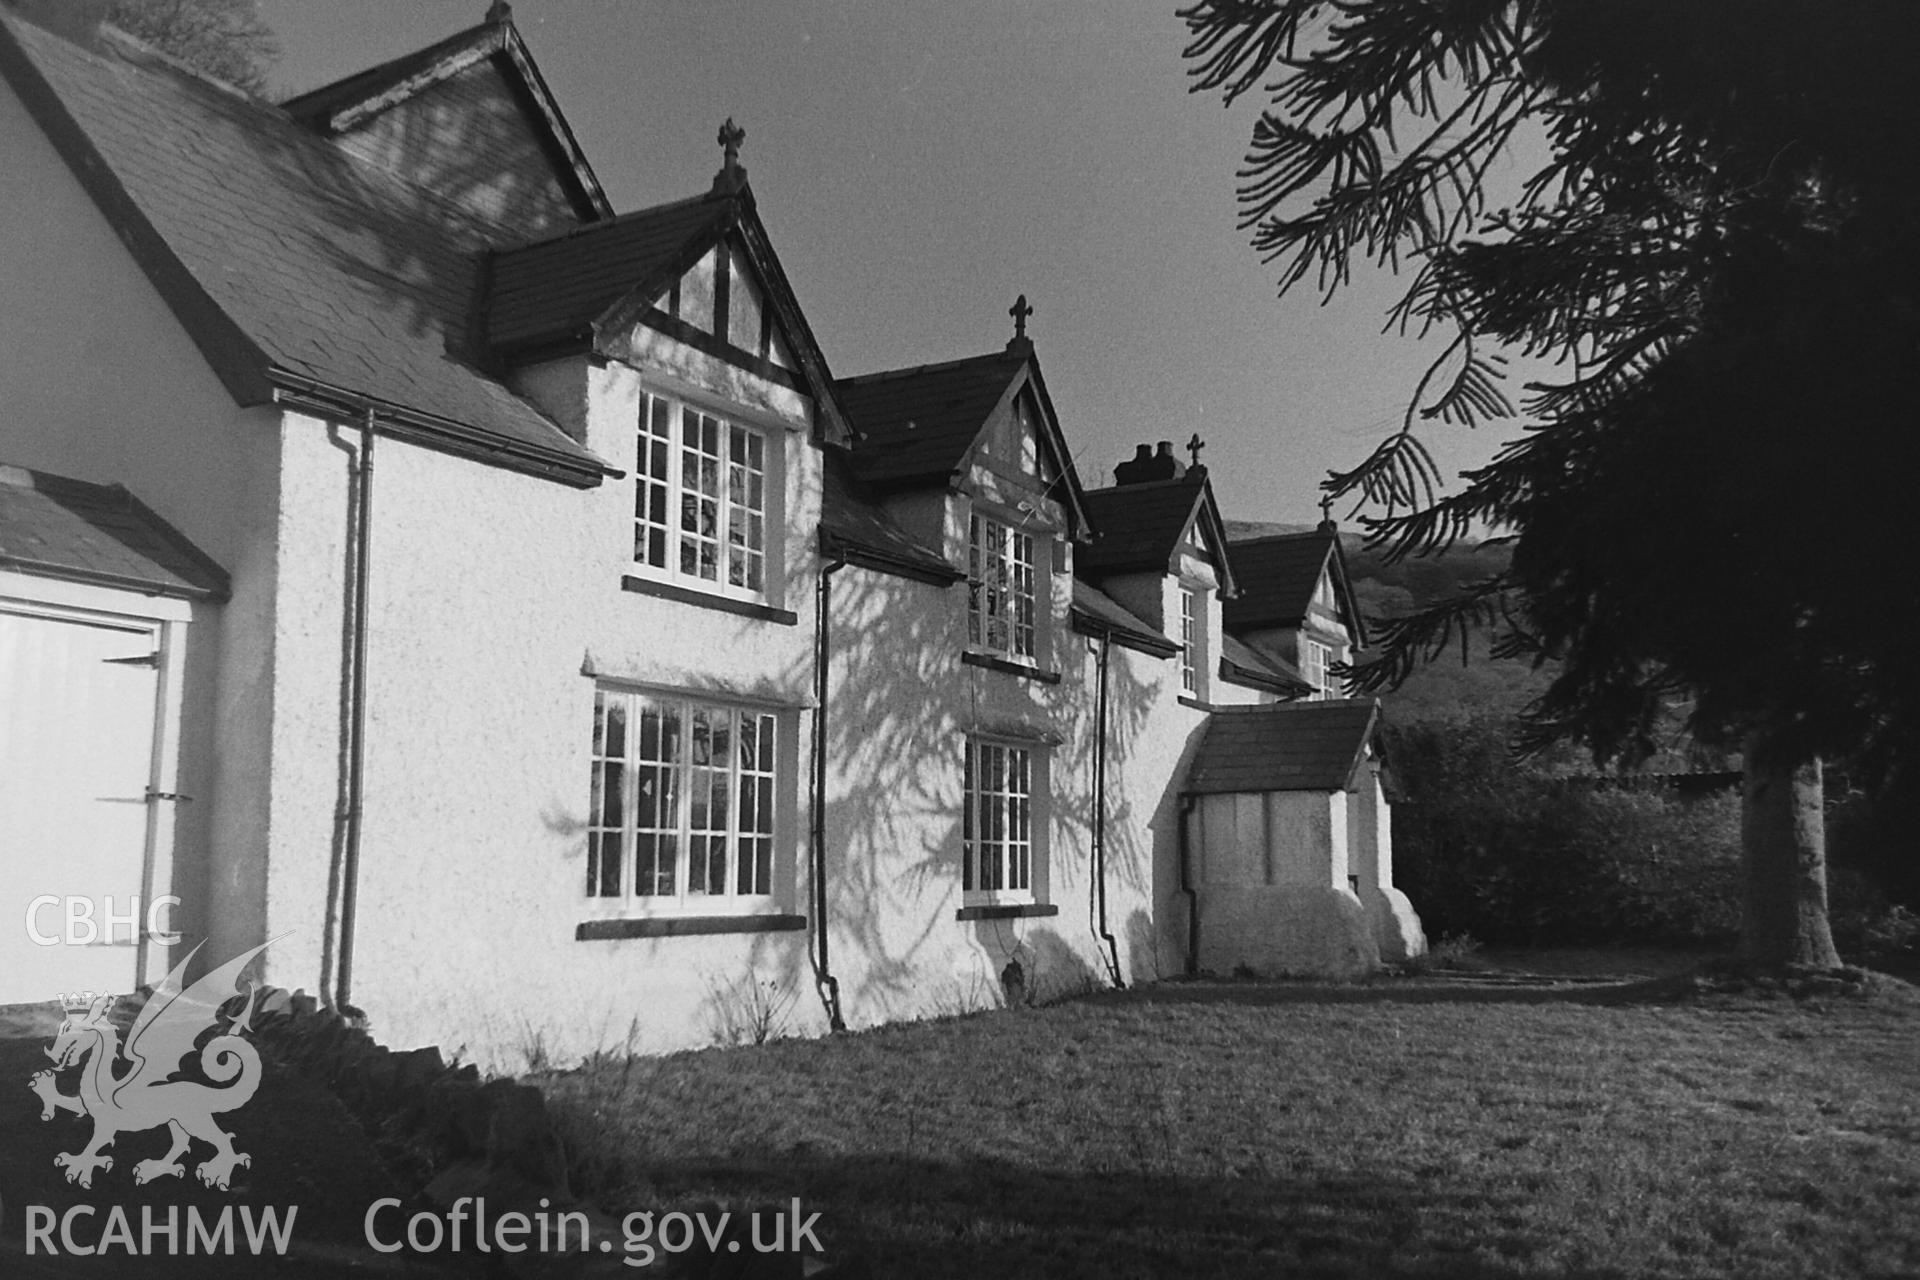 Black and white photo showing Bodringallt House, taken by Paul R. Davis, 1983.